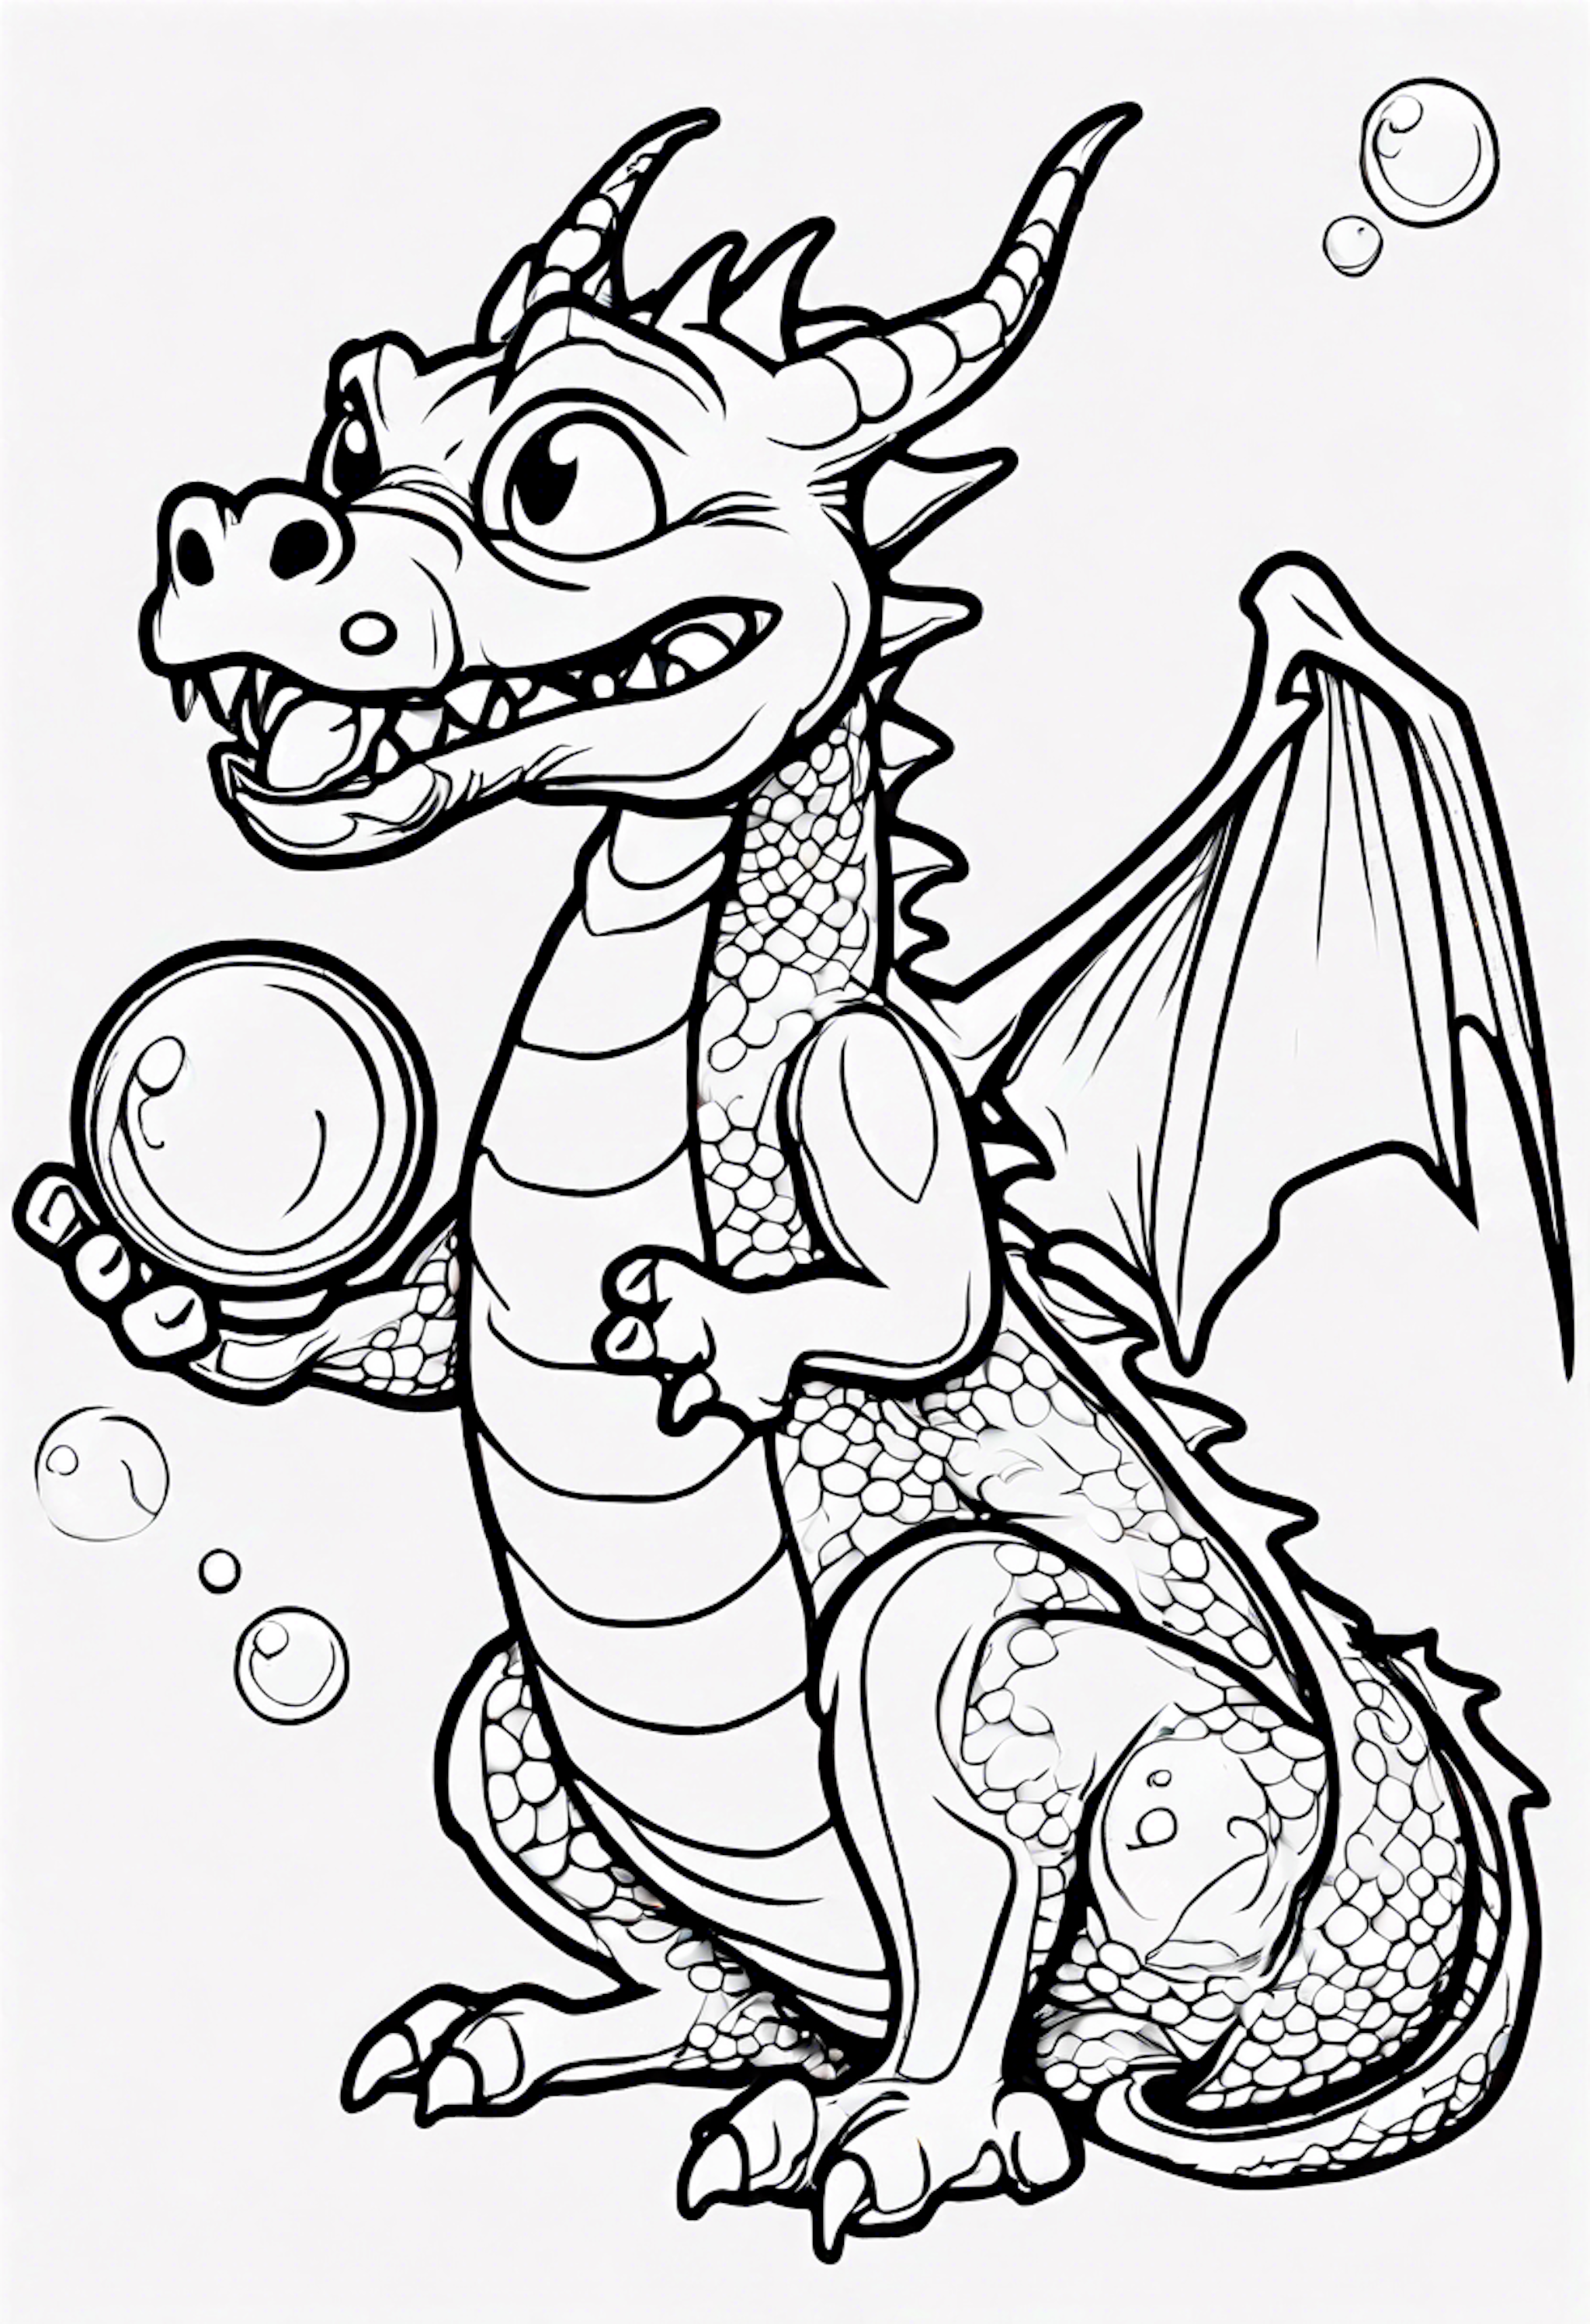 A coloring page for 74 Dragon coloring pages